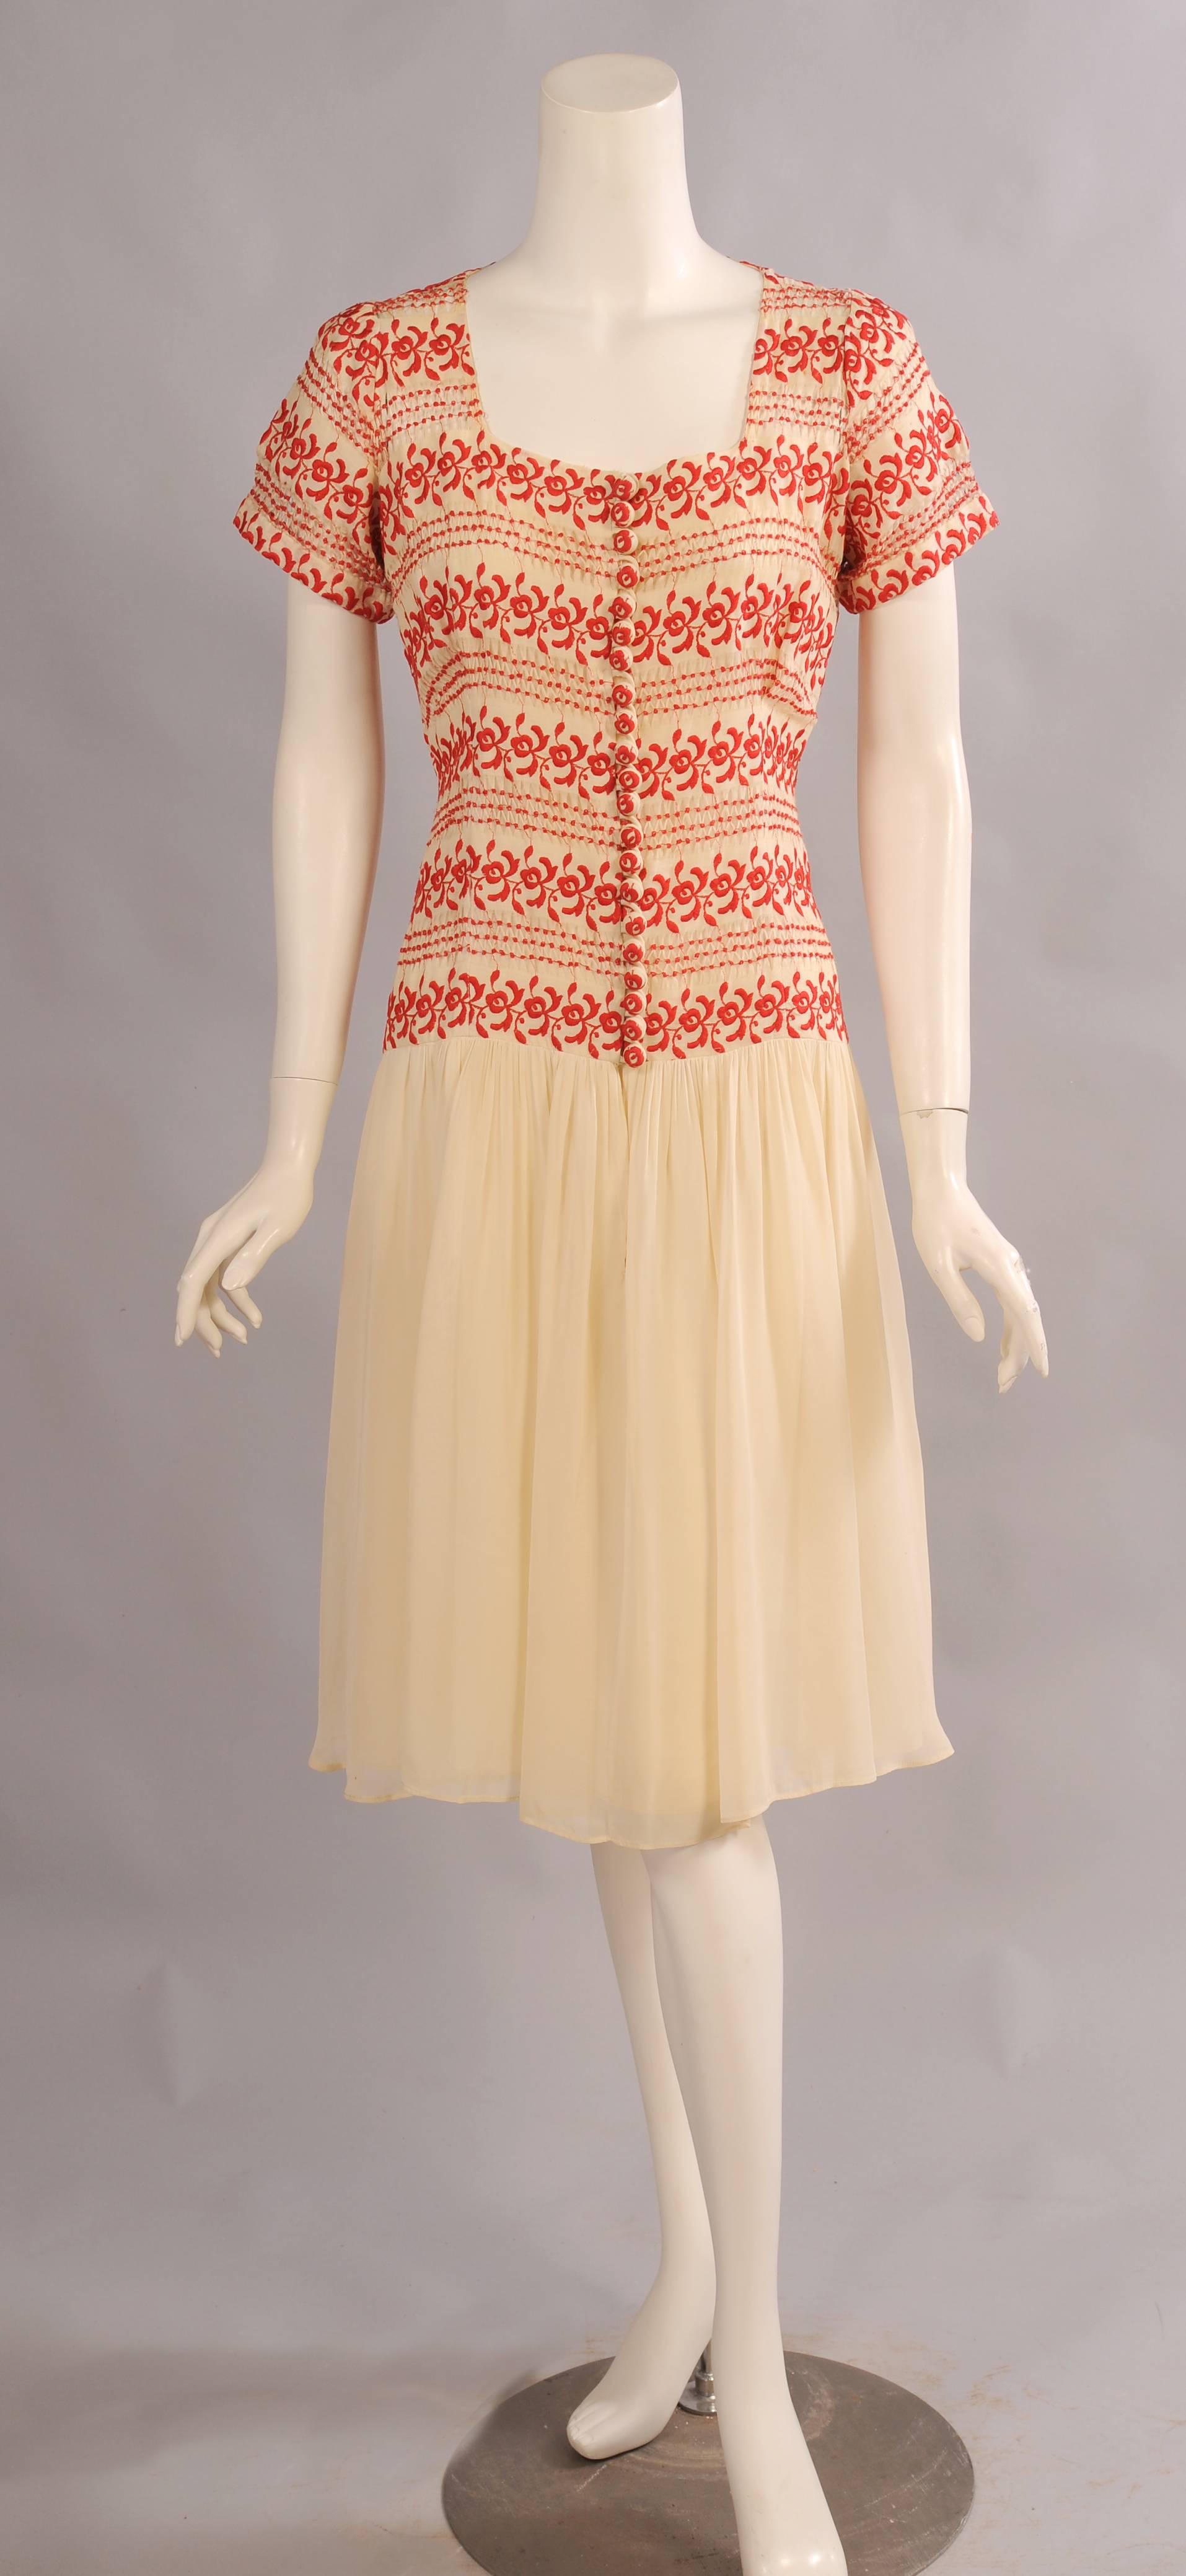 Drawn work and embroidery in red on cream linen are used for the bodice of this 1930's dress with a dropped waistline. The bodice is lined from the bust line to the hips and closes at the center front with 21 embroidered buttons and loops. The